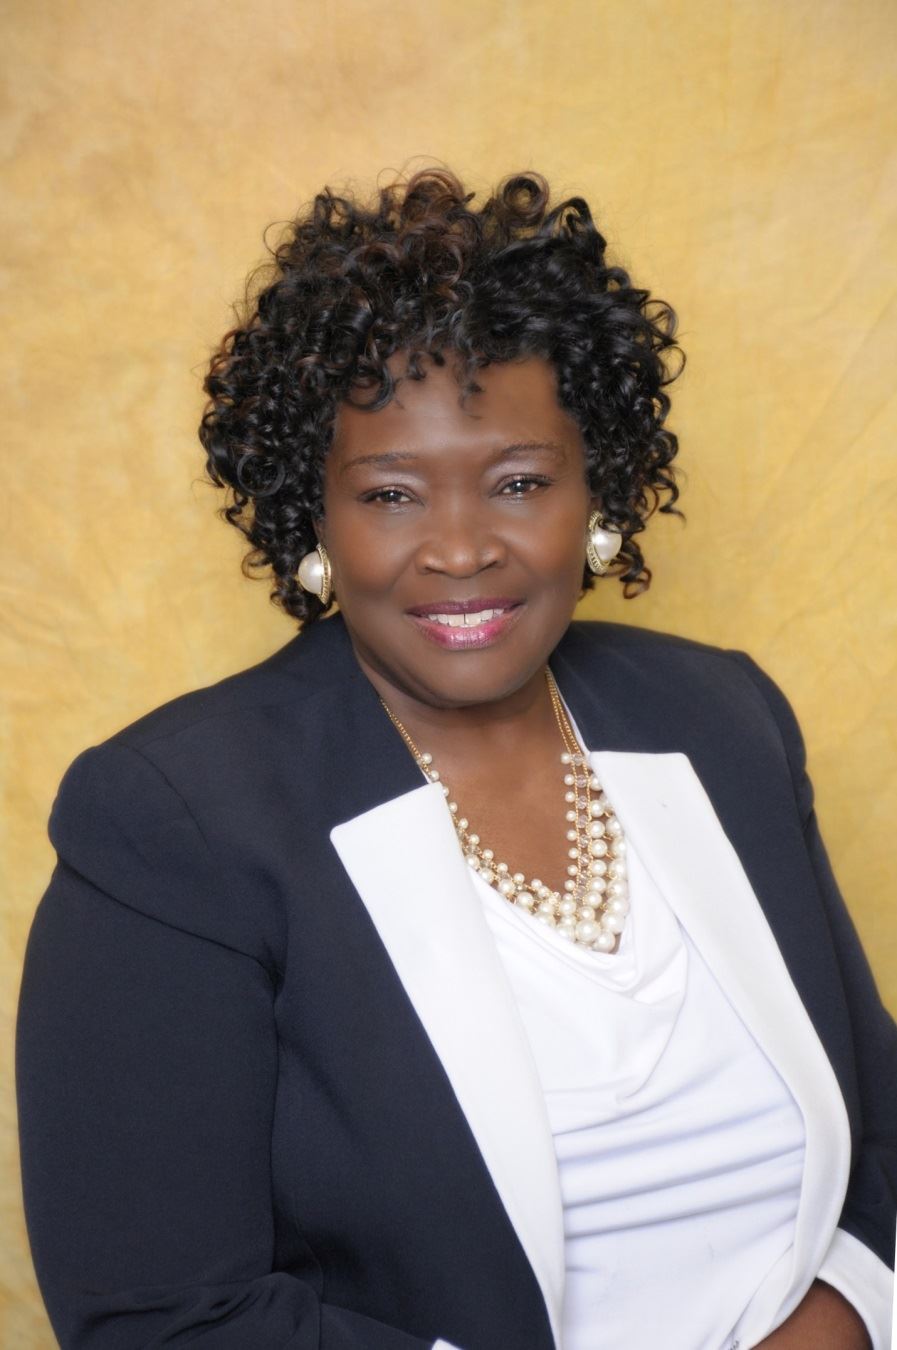 Dr. Thelma F. Sojourner, Superintendent